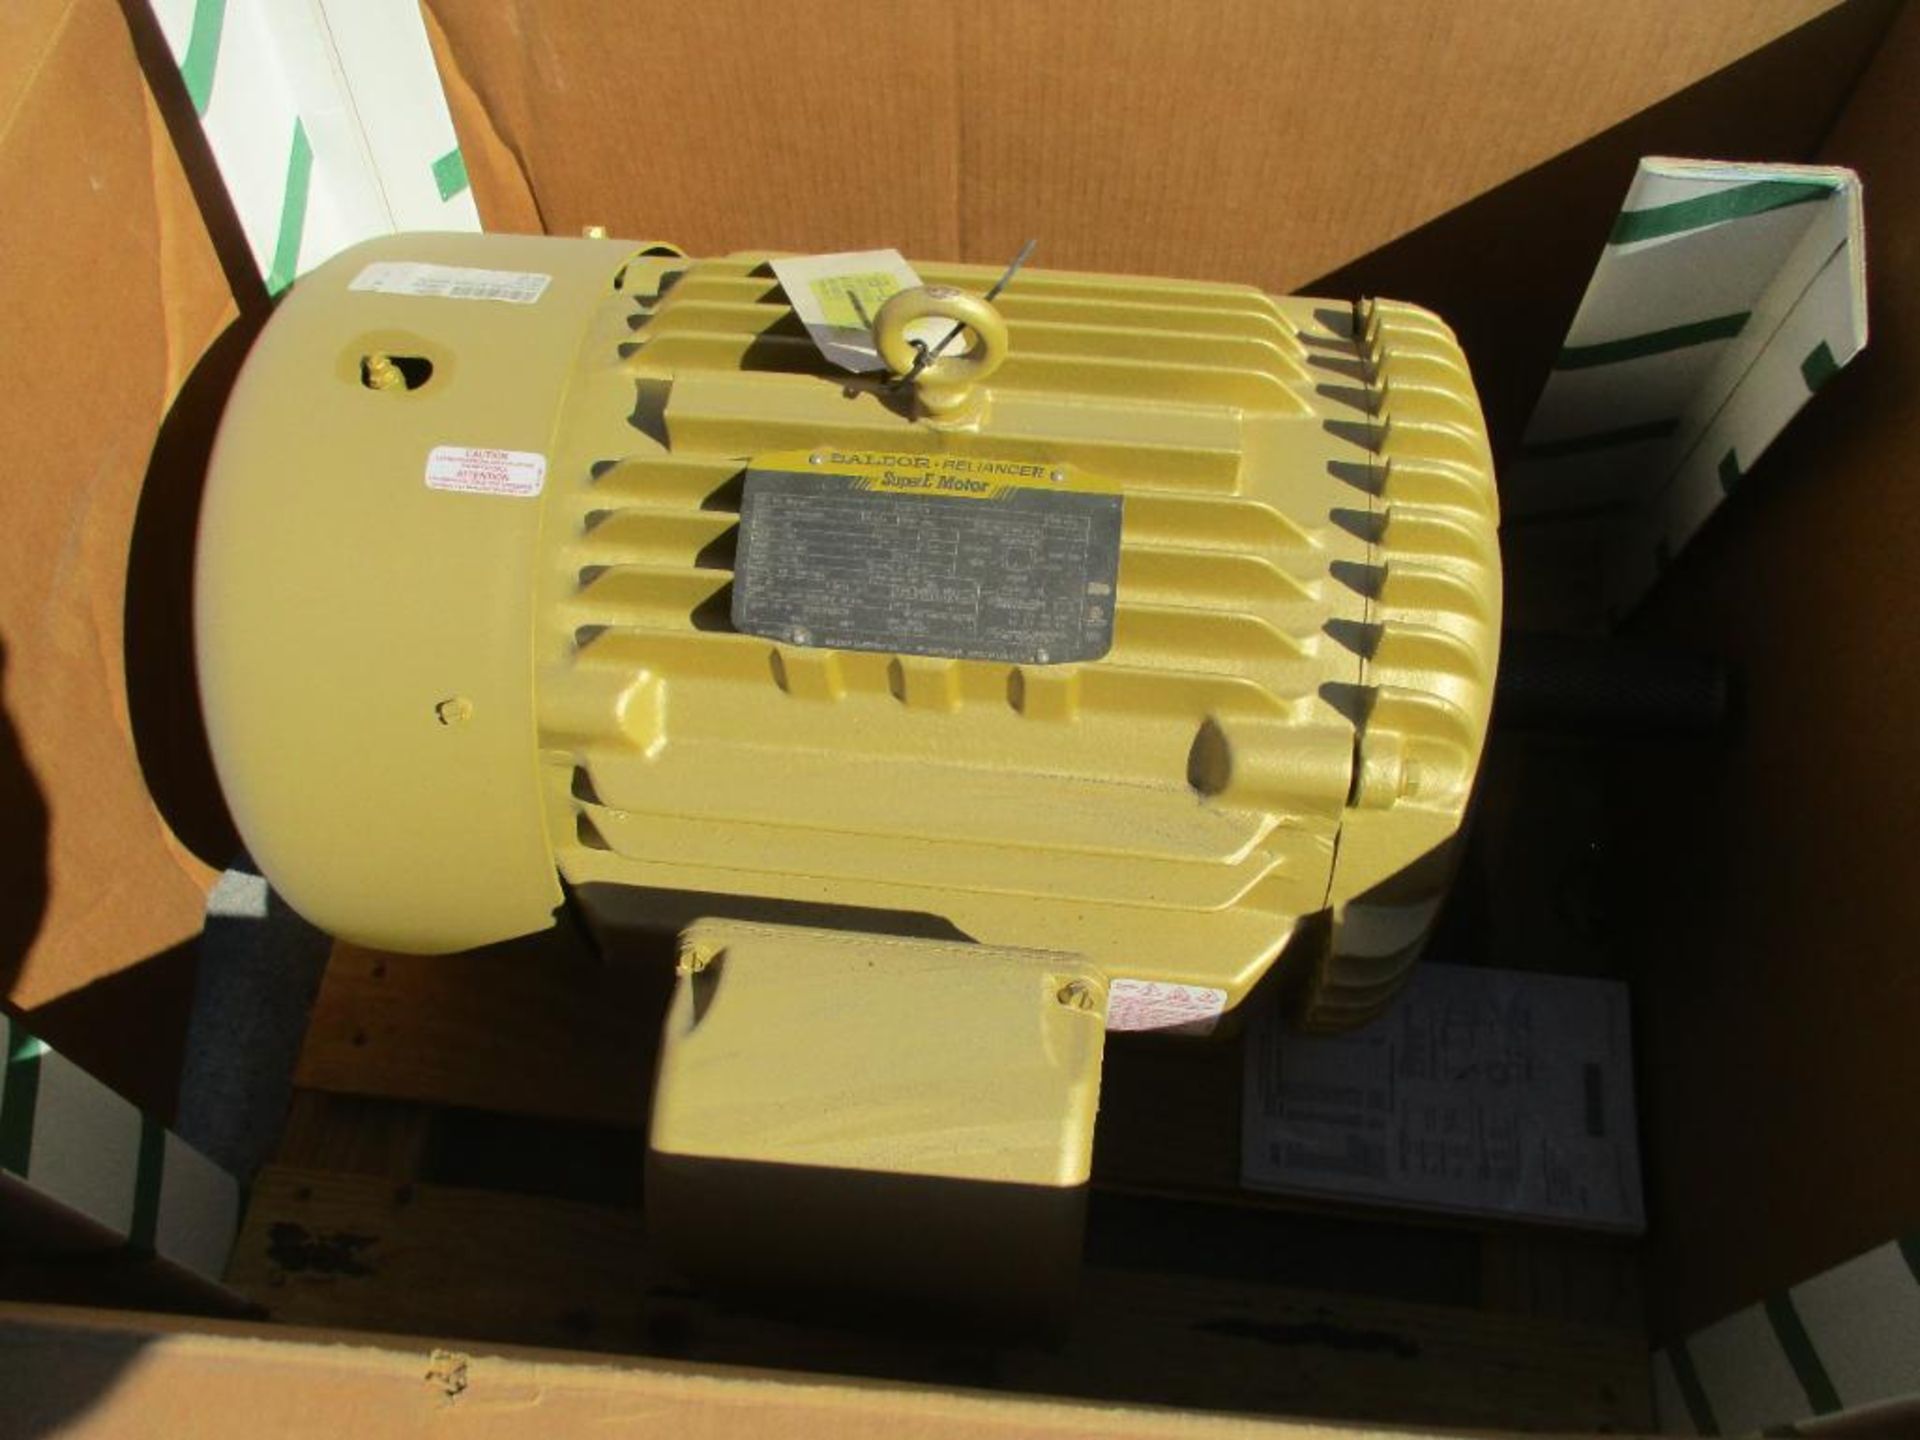 BALDOR 3 PHASE 30HP 1760RPM 286T FRAME A/C MOTOR P/N EM4104T 423# LBS (THIS LOT IS FOB KNOXVILLE TN)